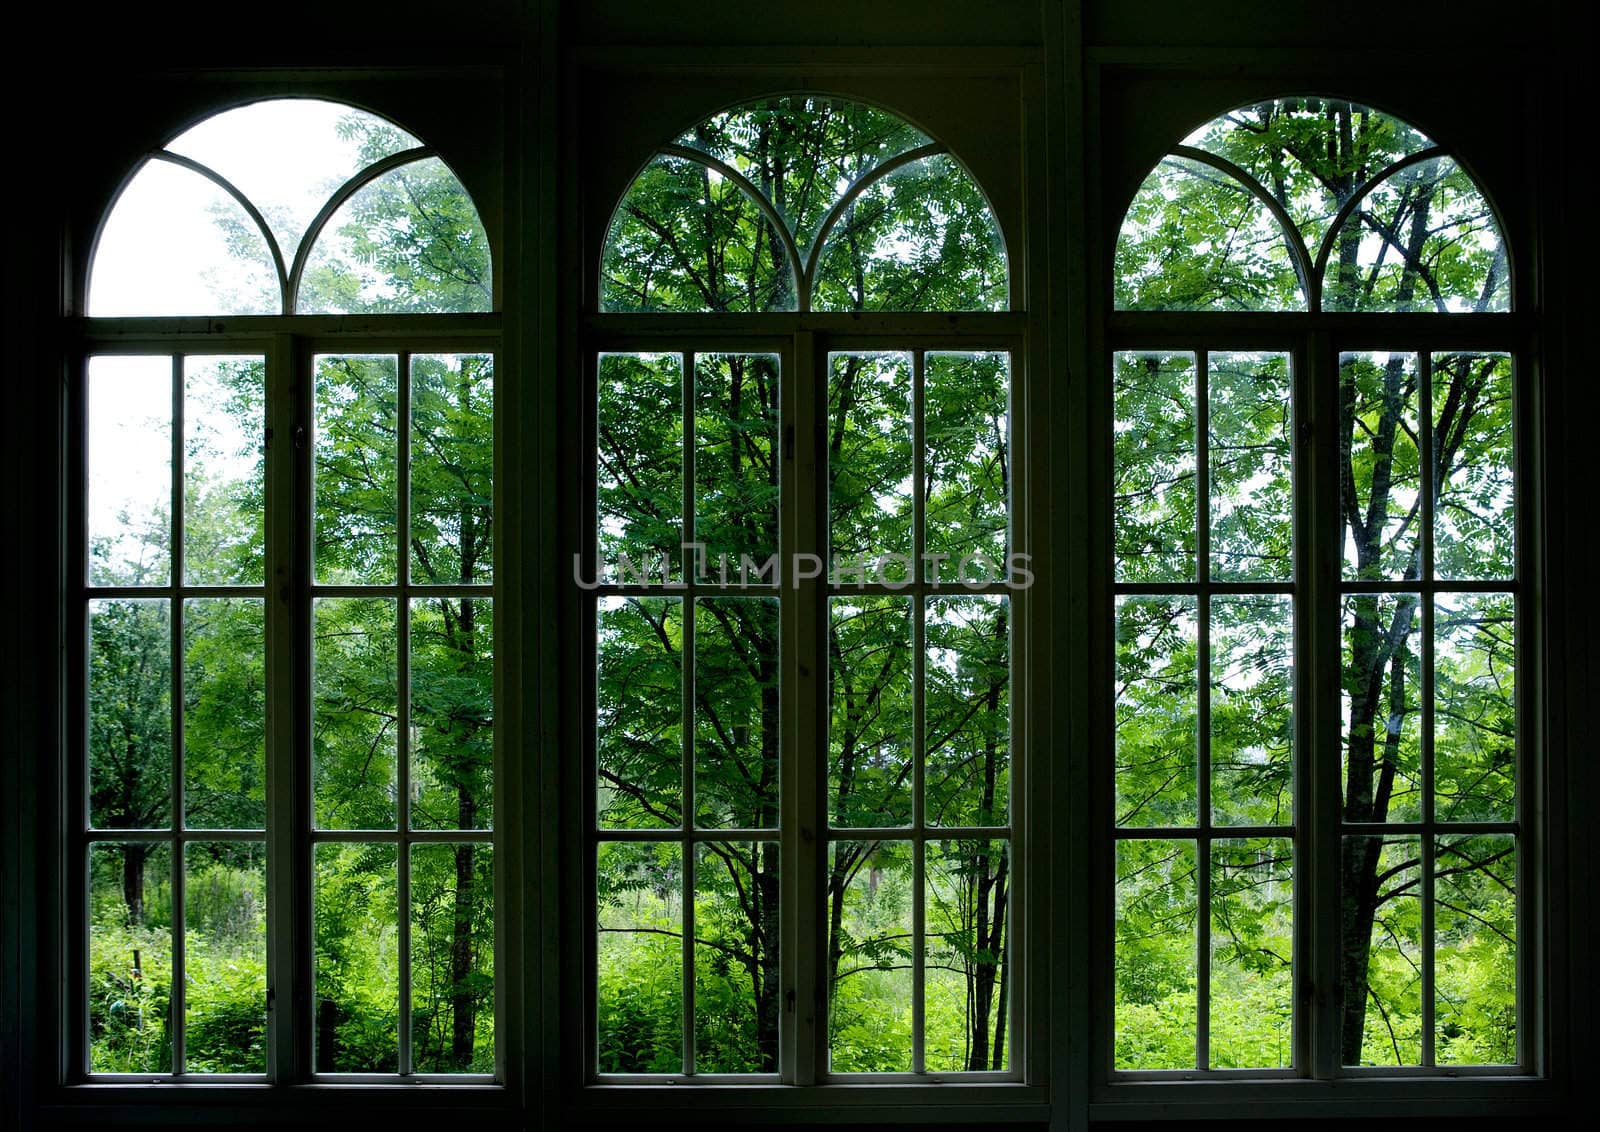 Large arched windows looking out into a garden or forest